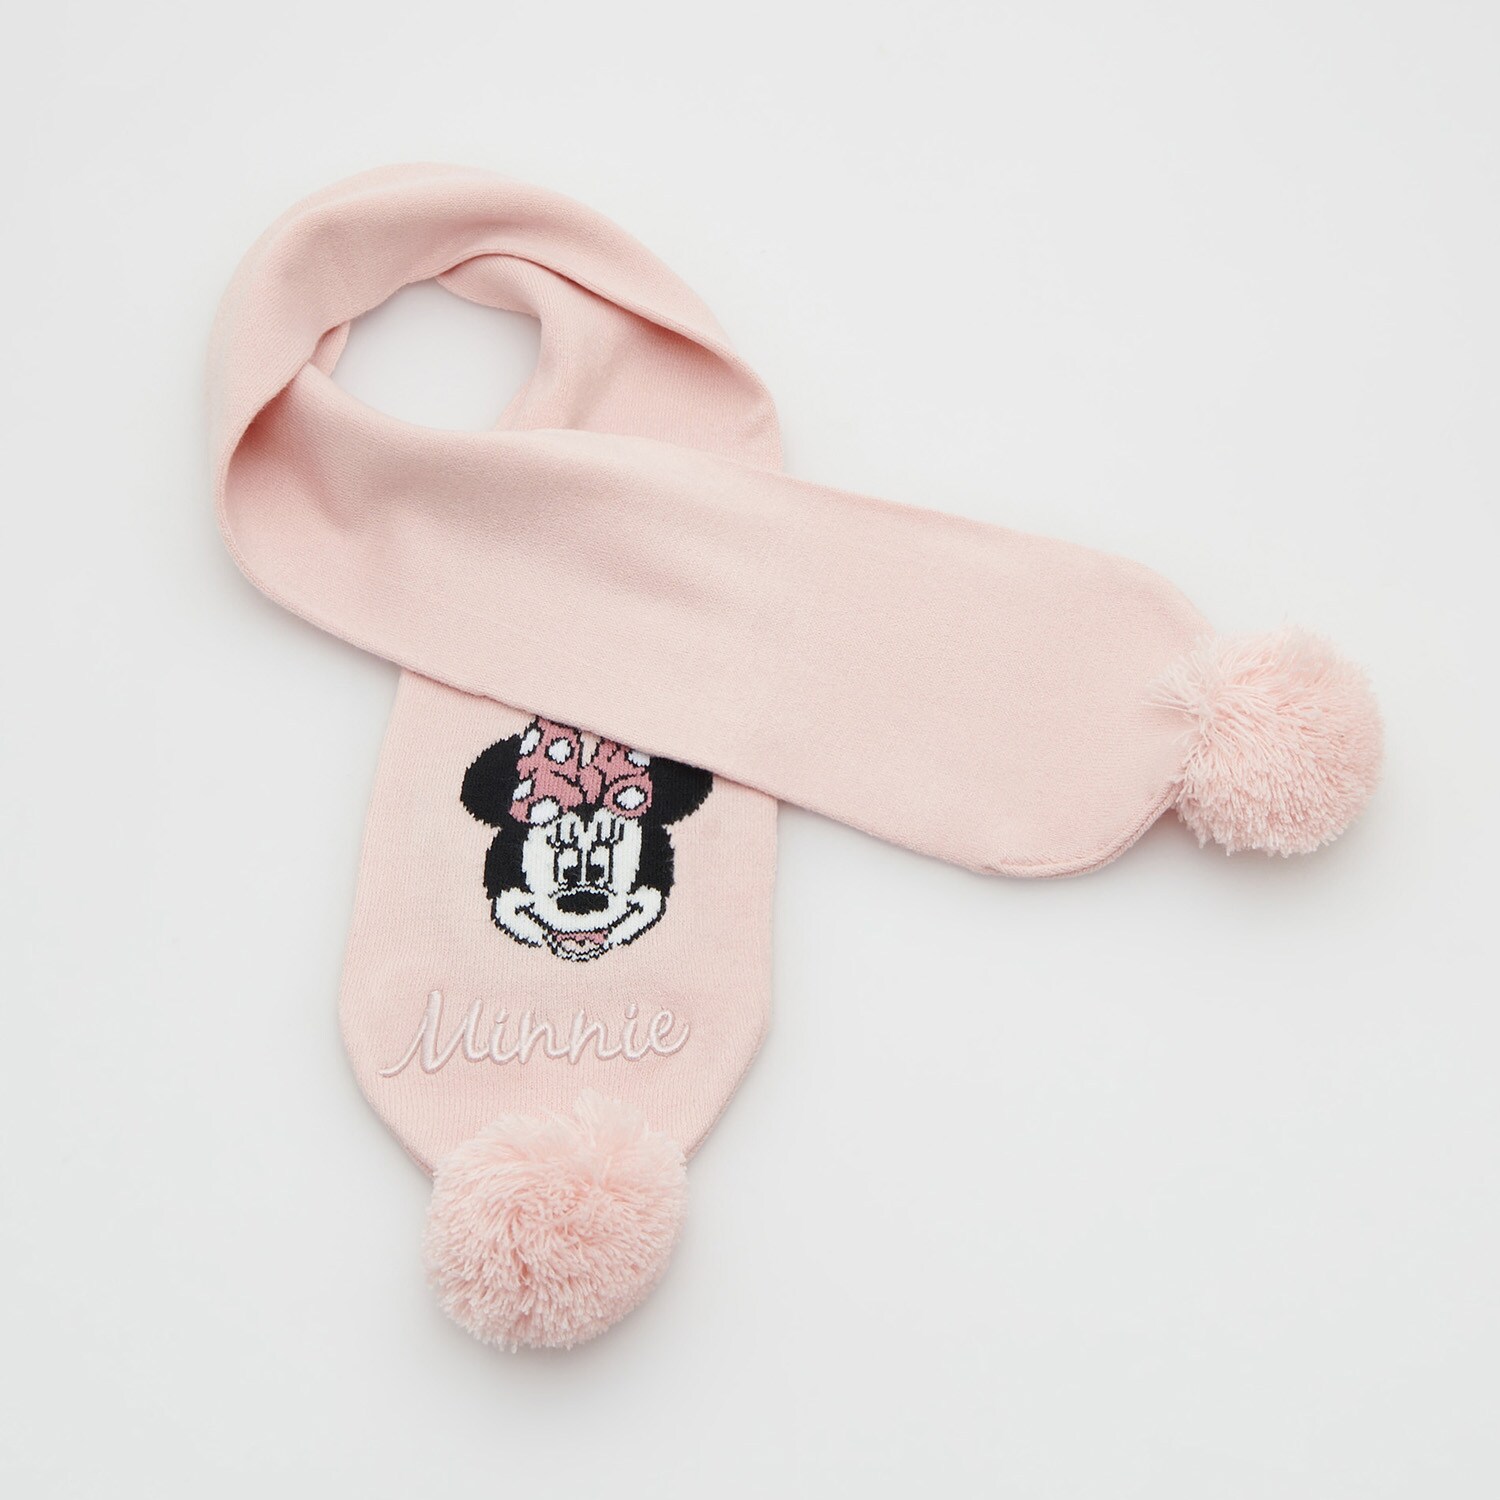 Reserved – Fular Minnie Mouse – Roz accessories imagine noua 2022